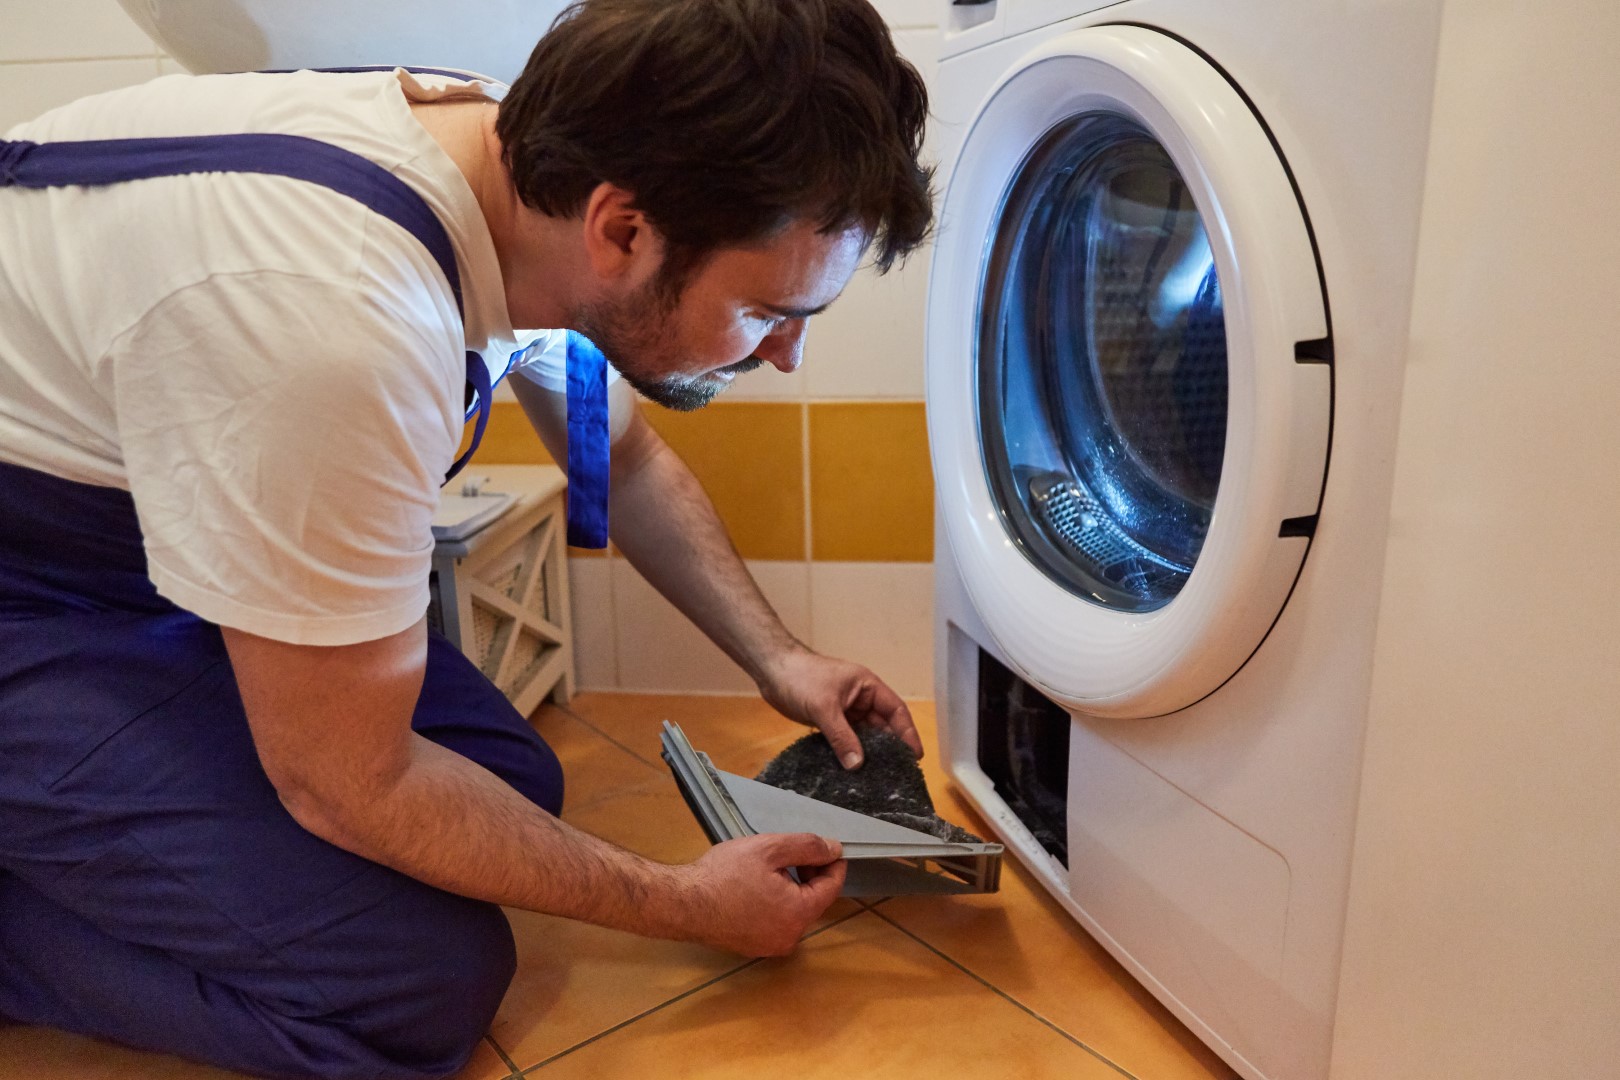 Appliance Repair Costs: How Much Is Too Much? | SHW Blog